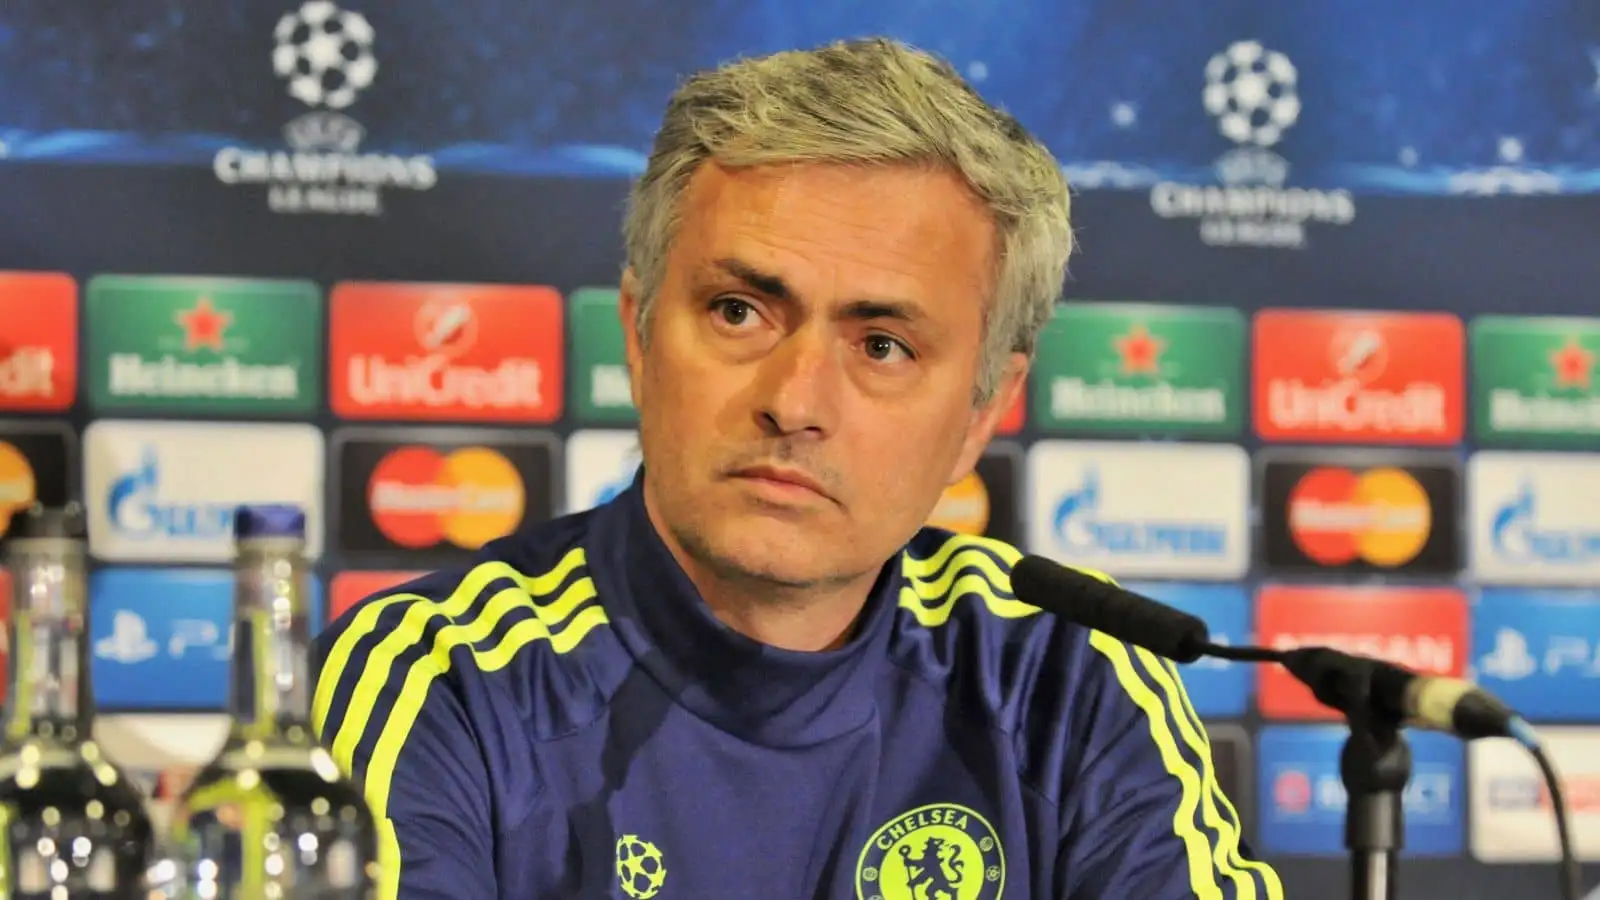 Jose Mourinho during a Champions League presser while Chelsea manager